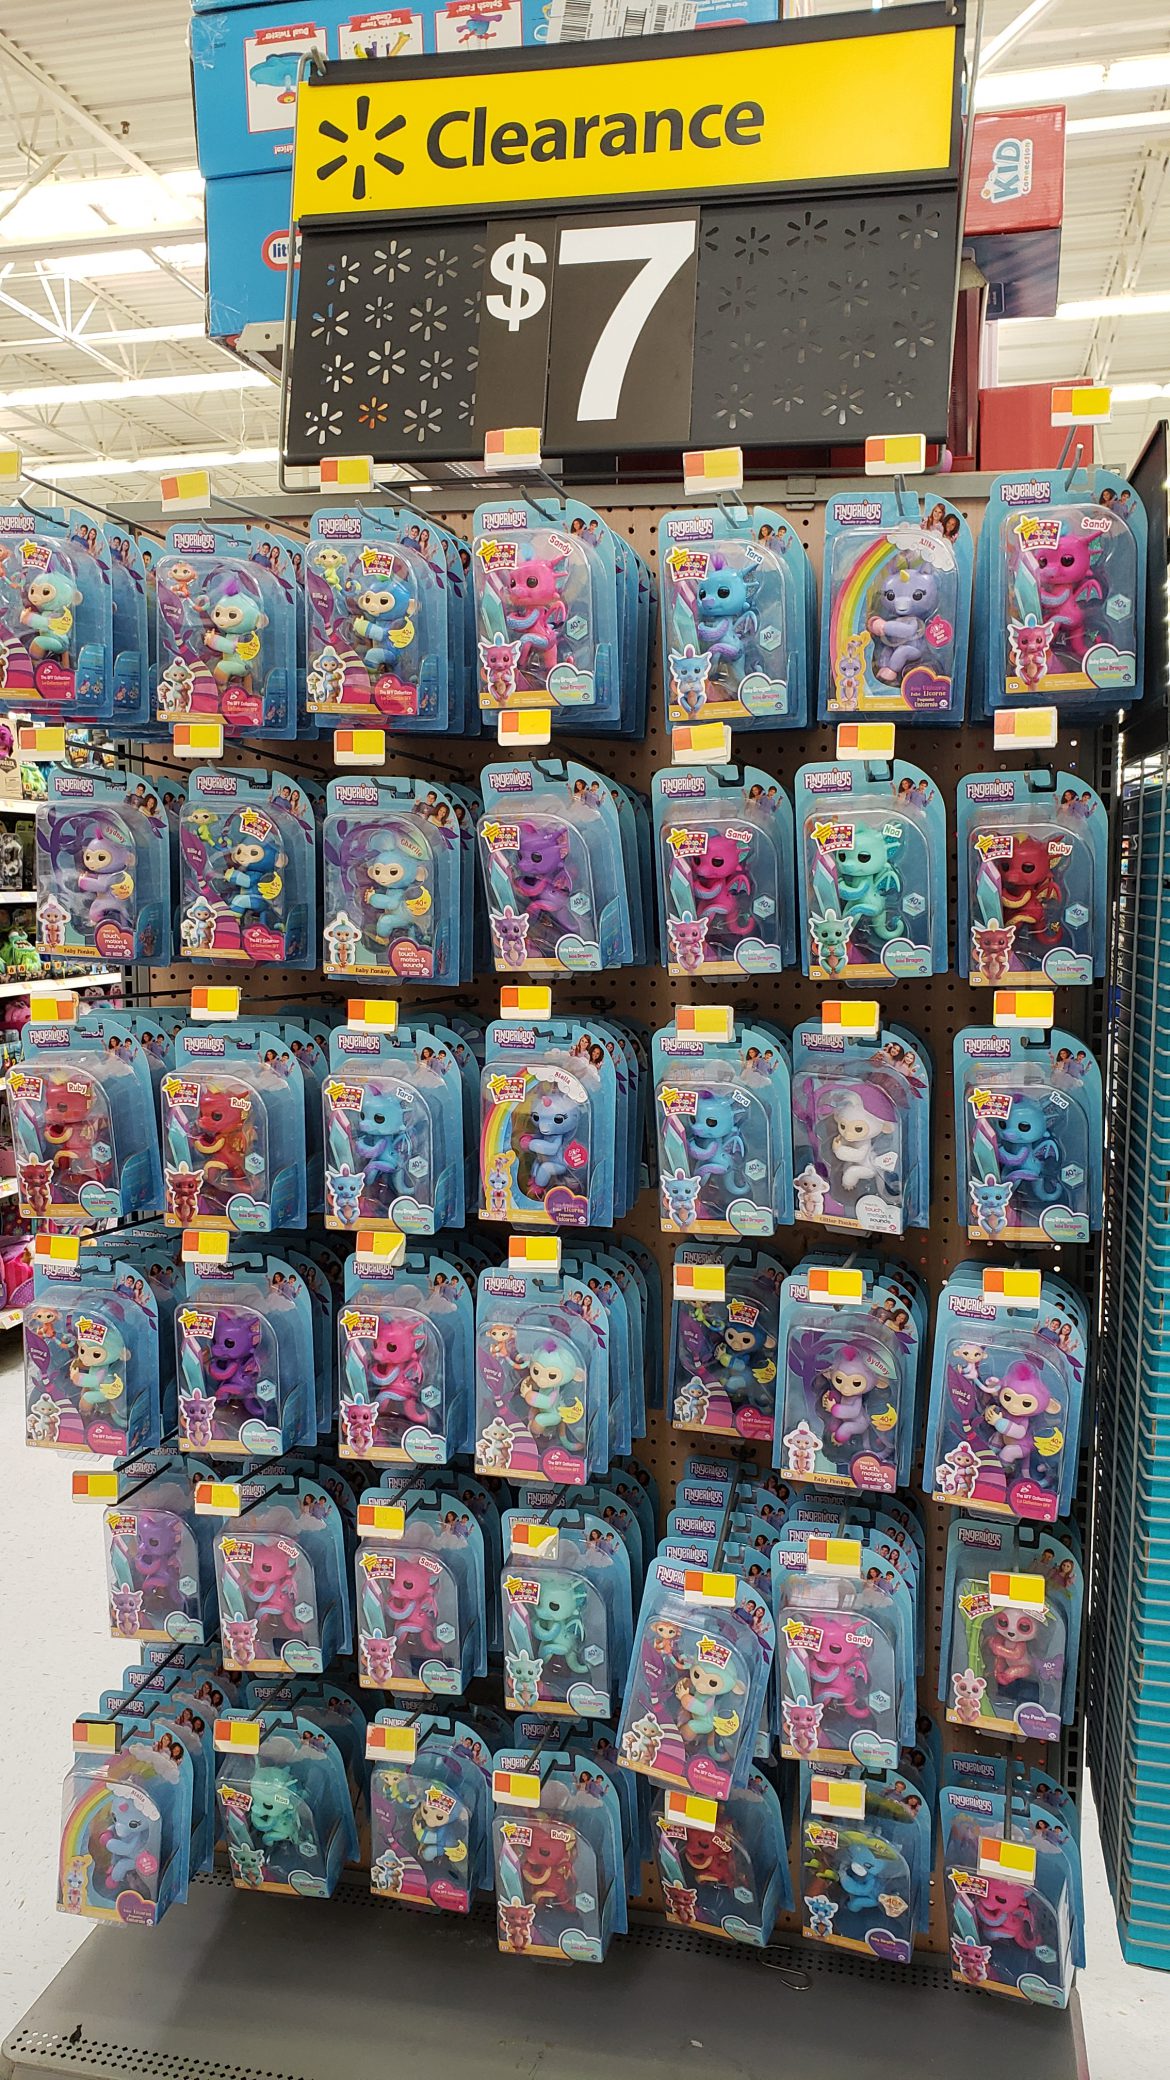 The Death of Fingerlings and Hatchimals…?